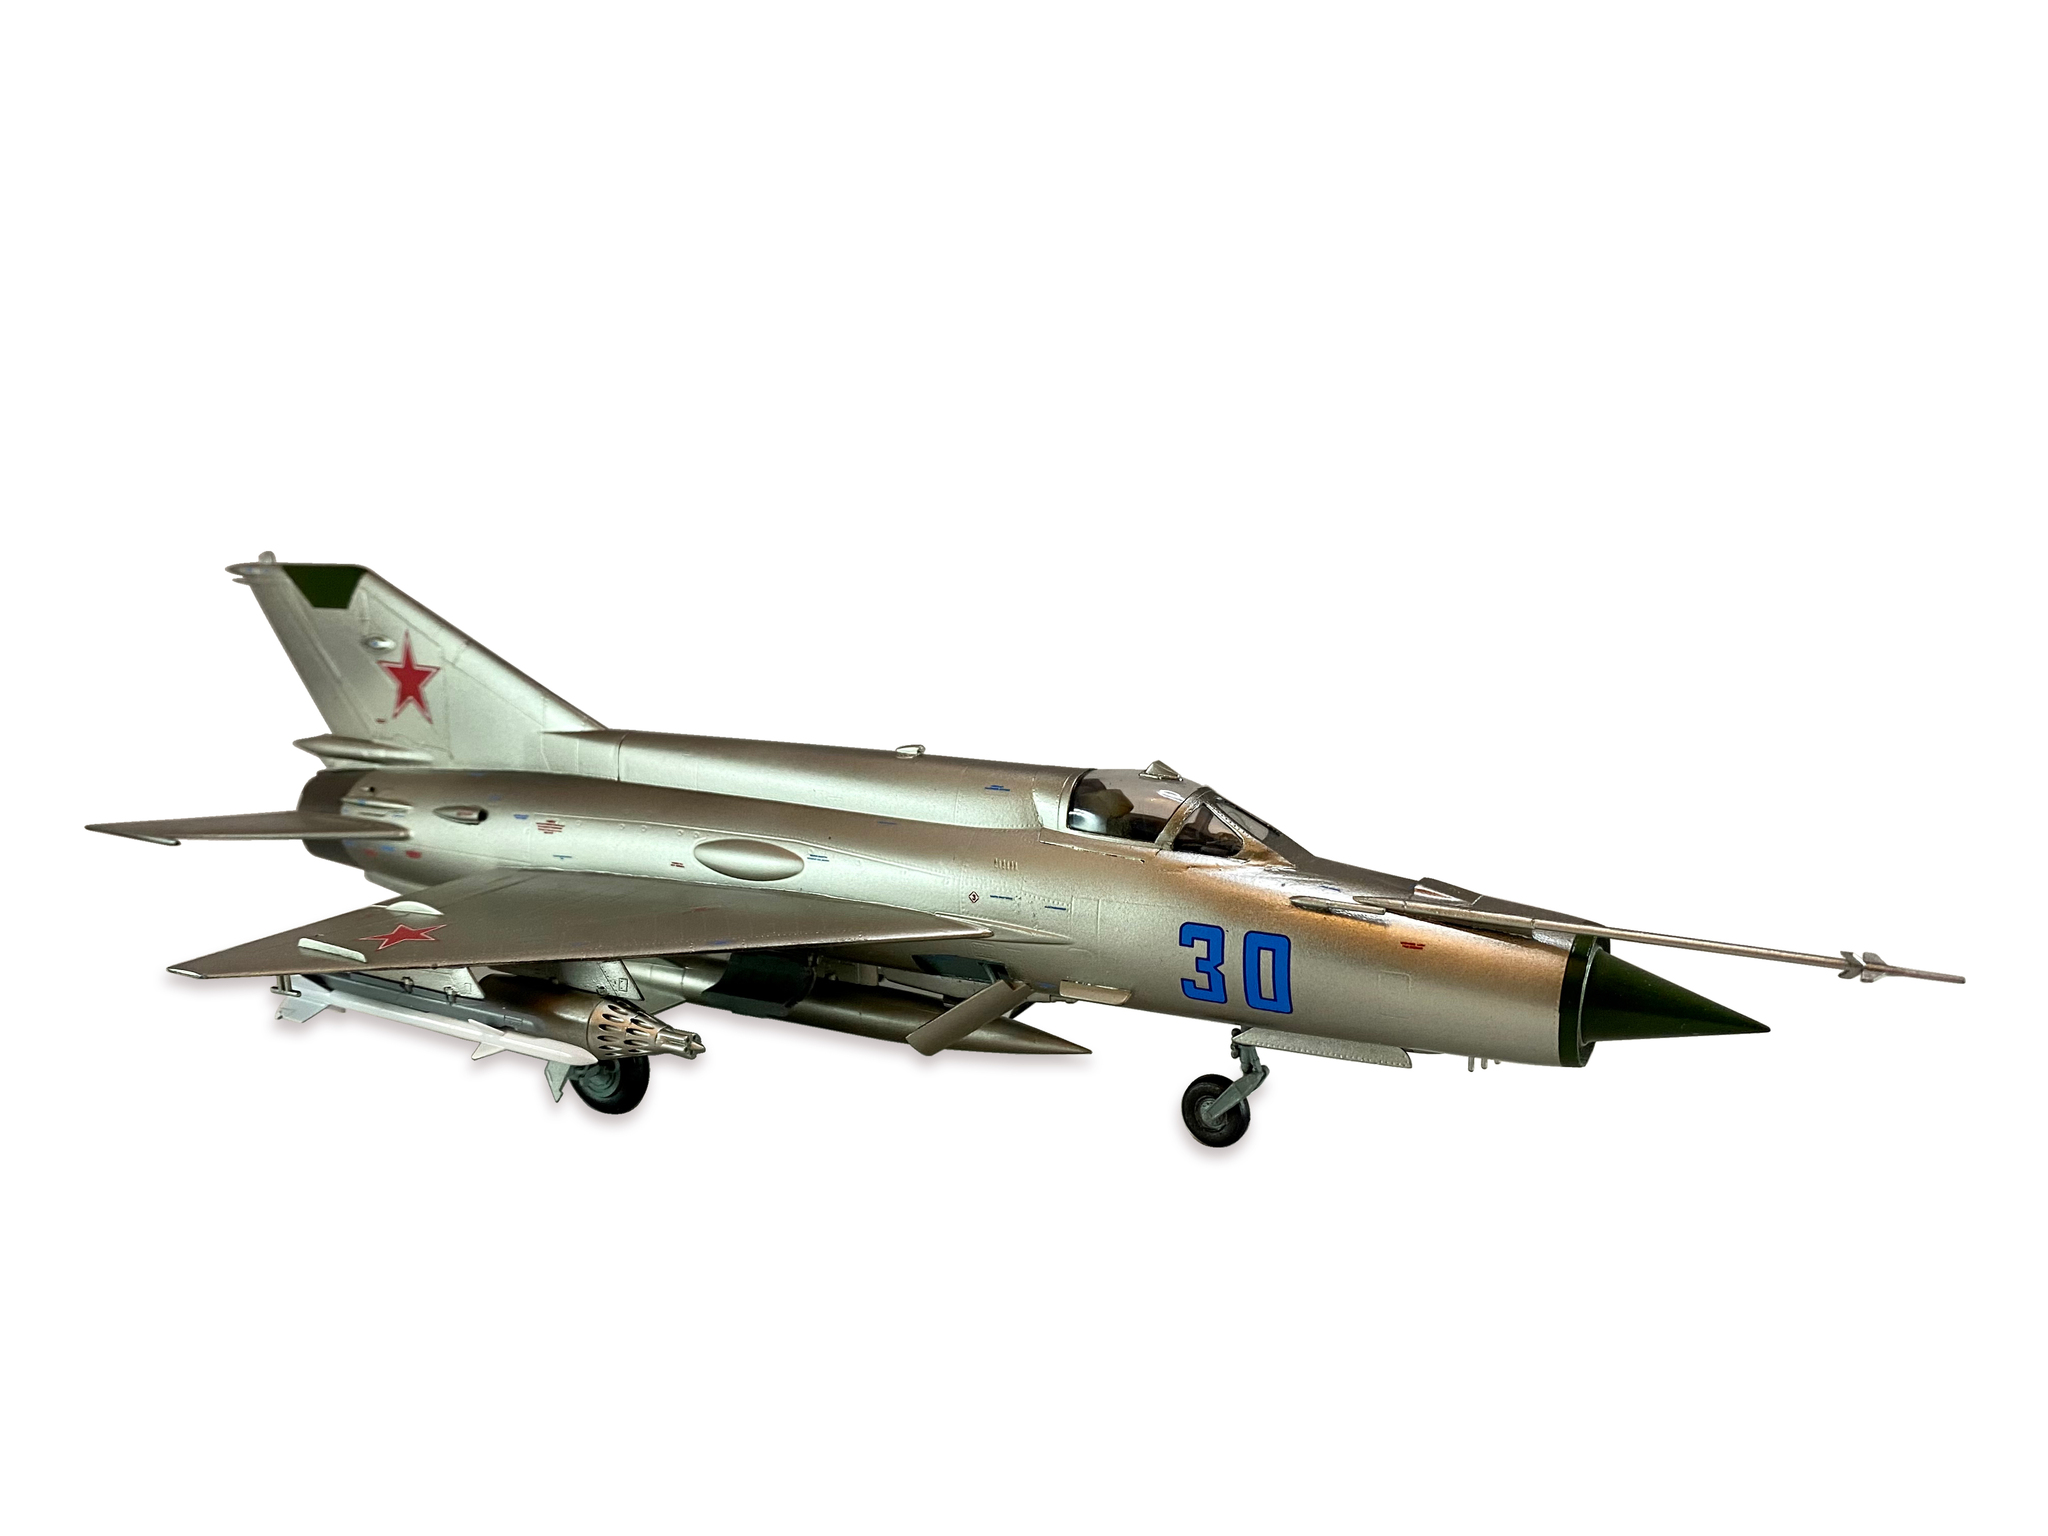 MiG-21MF at 1:48 - My, Modeling, Stand modeling, Scale model, Jet, 1:48, Made in USSR, the USSR, Longpost, MiG-21